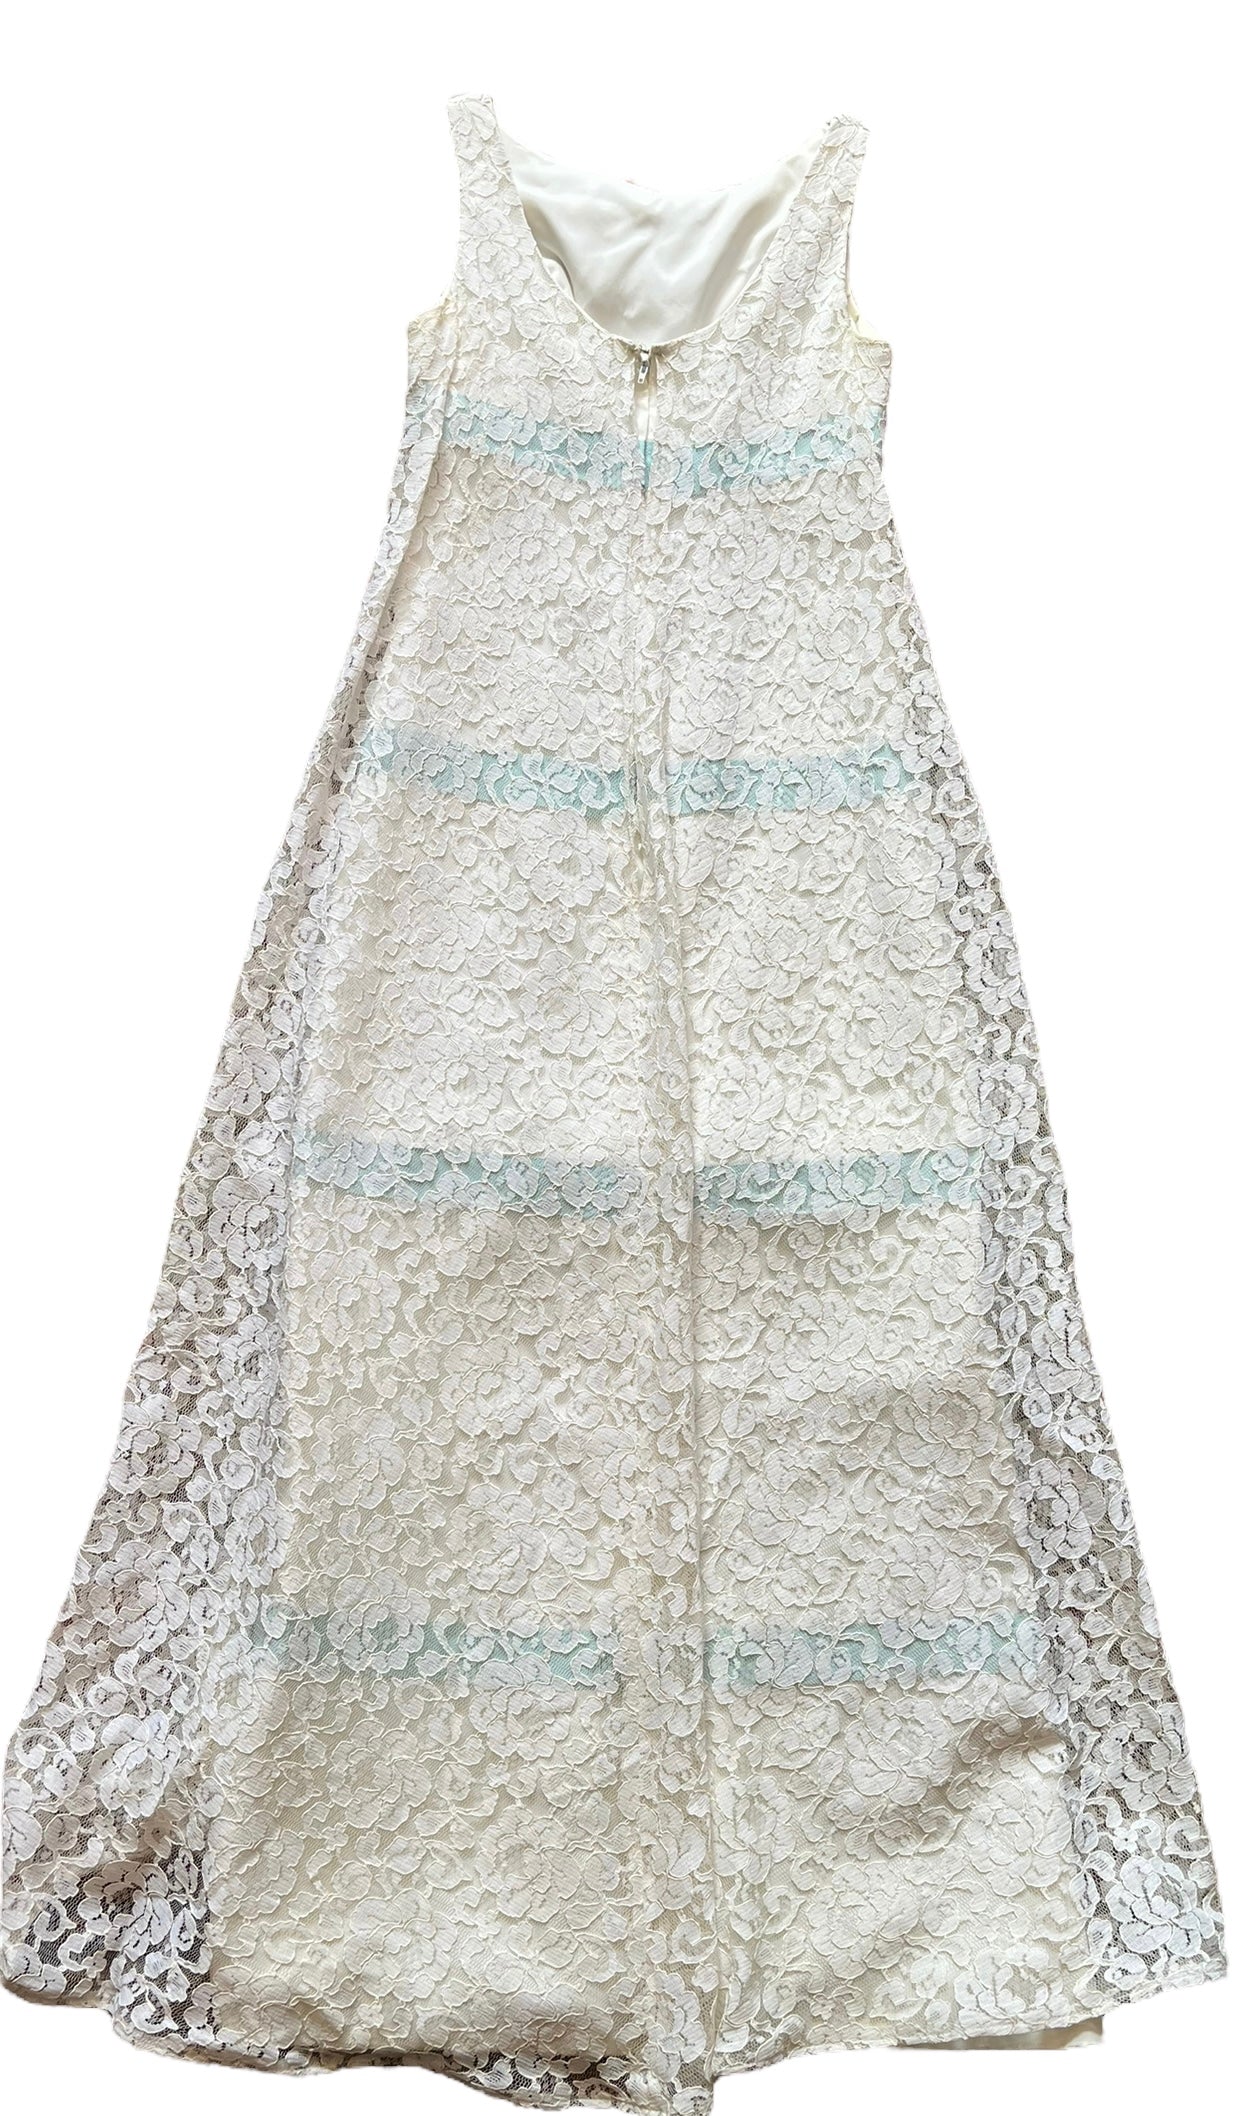 Full back view of Vintage 1960s Lace Dress with Blue Bows